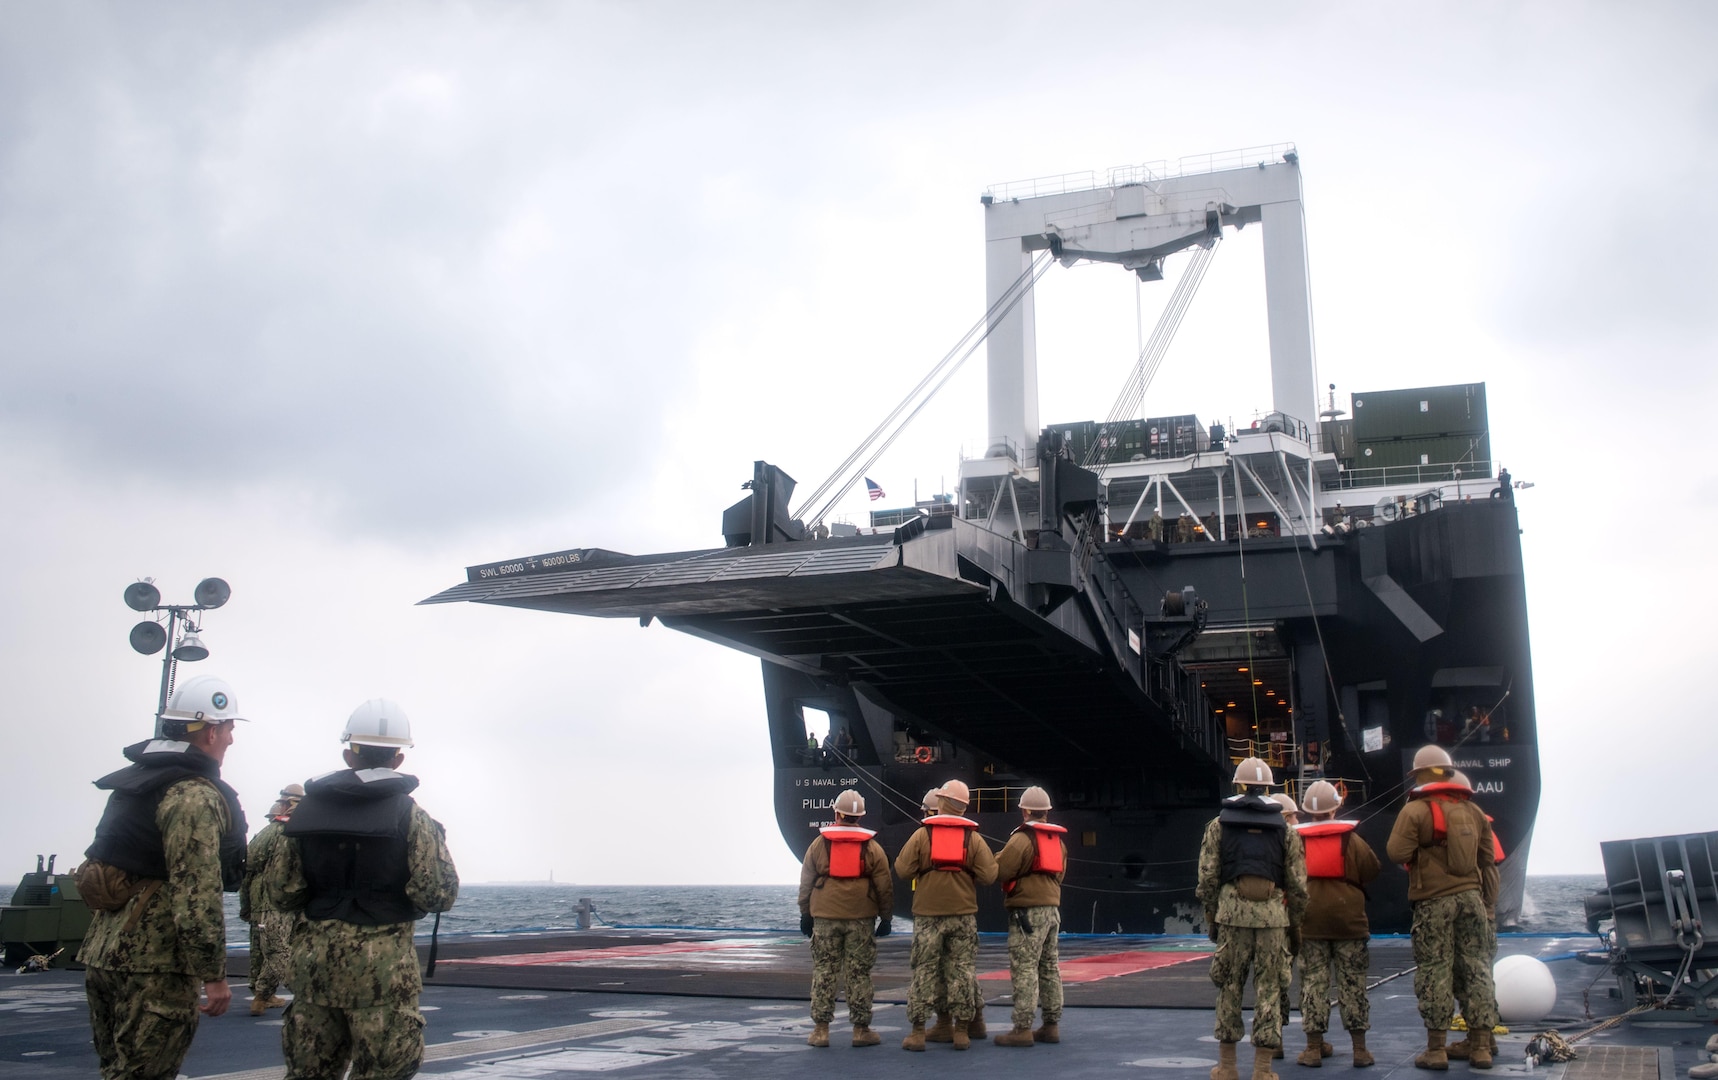 Sailors, attached to Amphibious Construction Battalion 1 and 2, work on connecting Improved Navy Lighterage System Roll-on/Roll-off Discharge Facility to the ramp of USNS Pililaau (T-AKR 304) during Operation Pacific Reach Exercise 2017 (OPRex17), April 9, 2017. OPRex17 is a bilateral training event designed to ensure readiness and sustain the ROK-U.S. Alliance by exercising an Area Distribution Center (ADC), an Air Terminal Supply Point (ATSP), Combined Joint Logistics Over-the-Shore (CLOTS), and the use of rail, inland waterways, and coastal lift operations to validate the operational reach concept. 